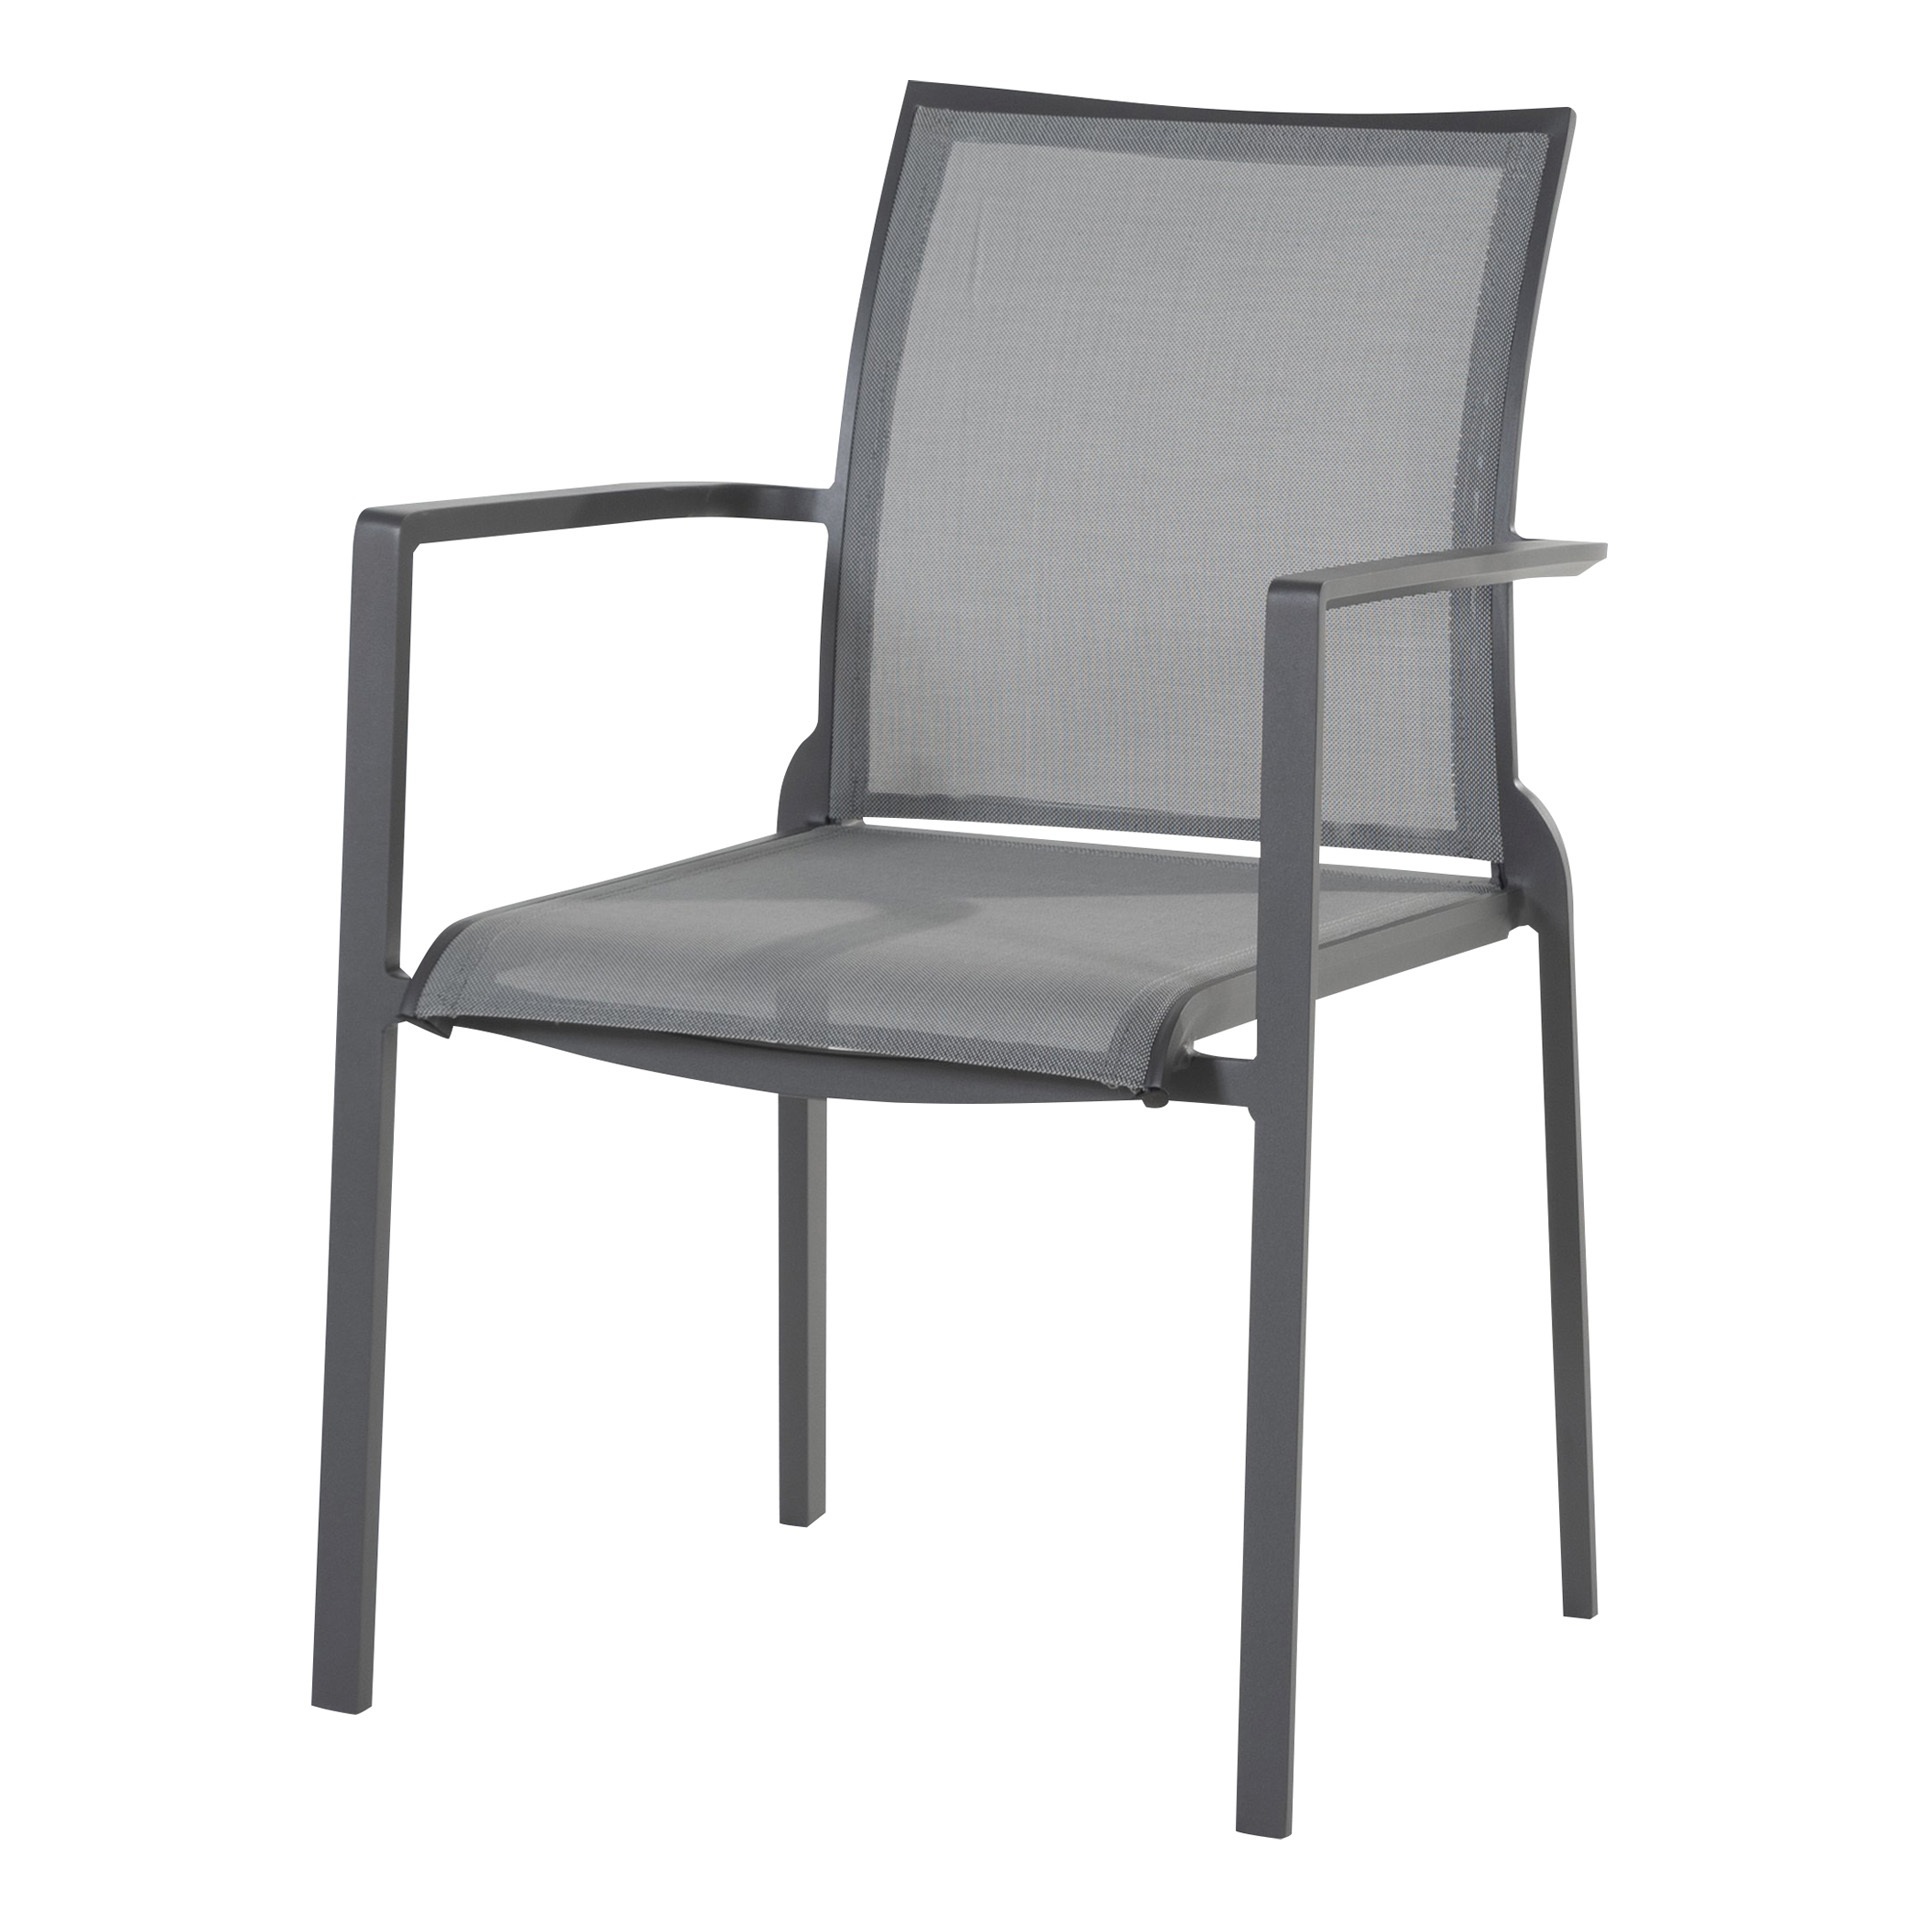 Melbourne stacking chair antracite 